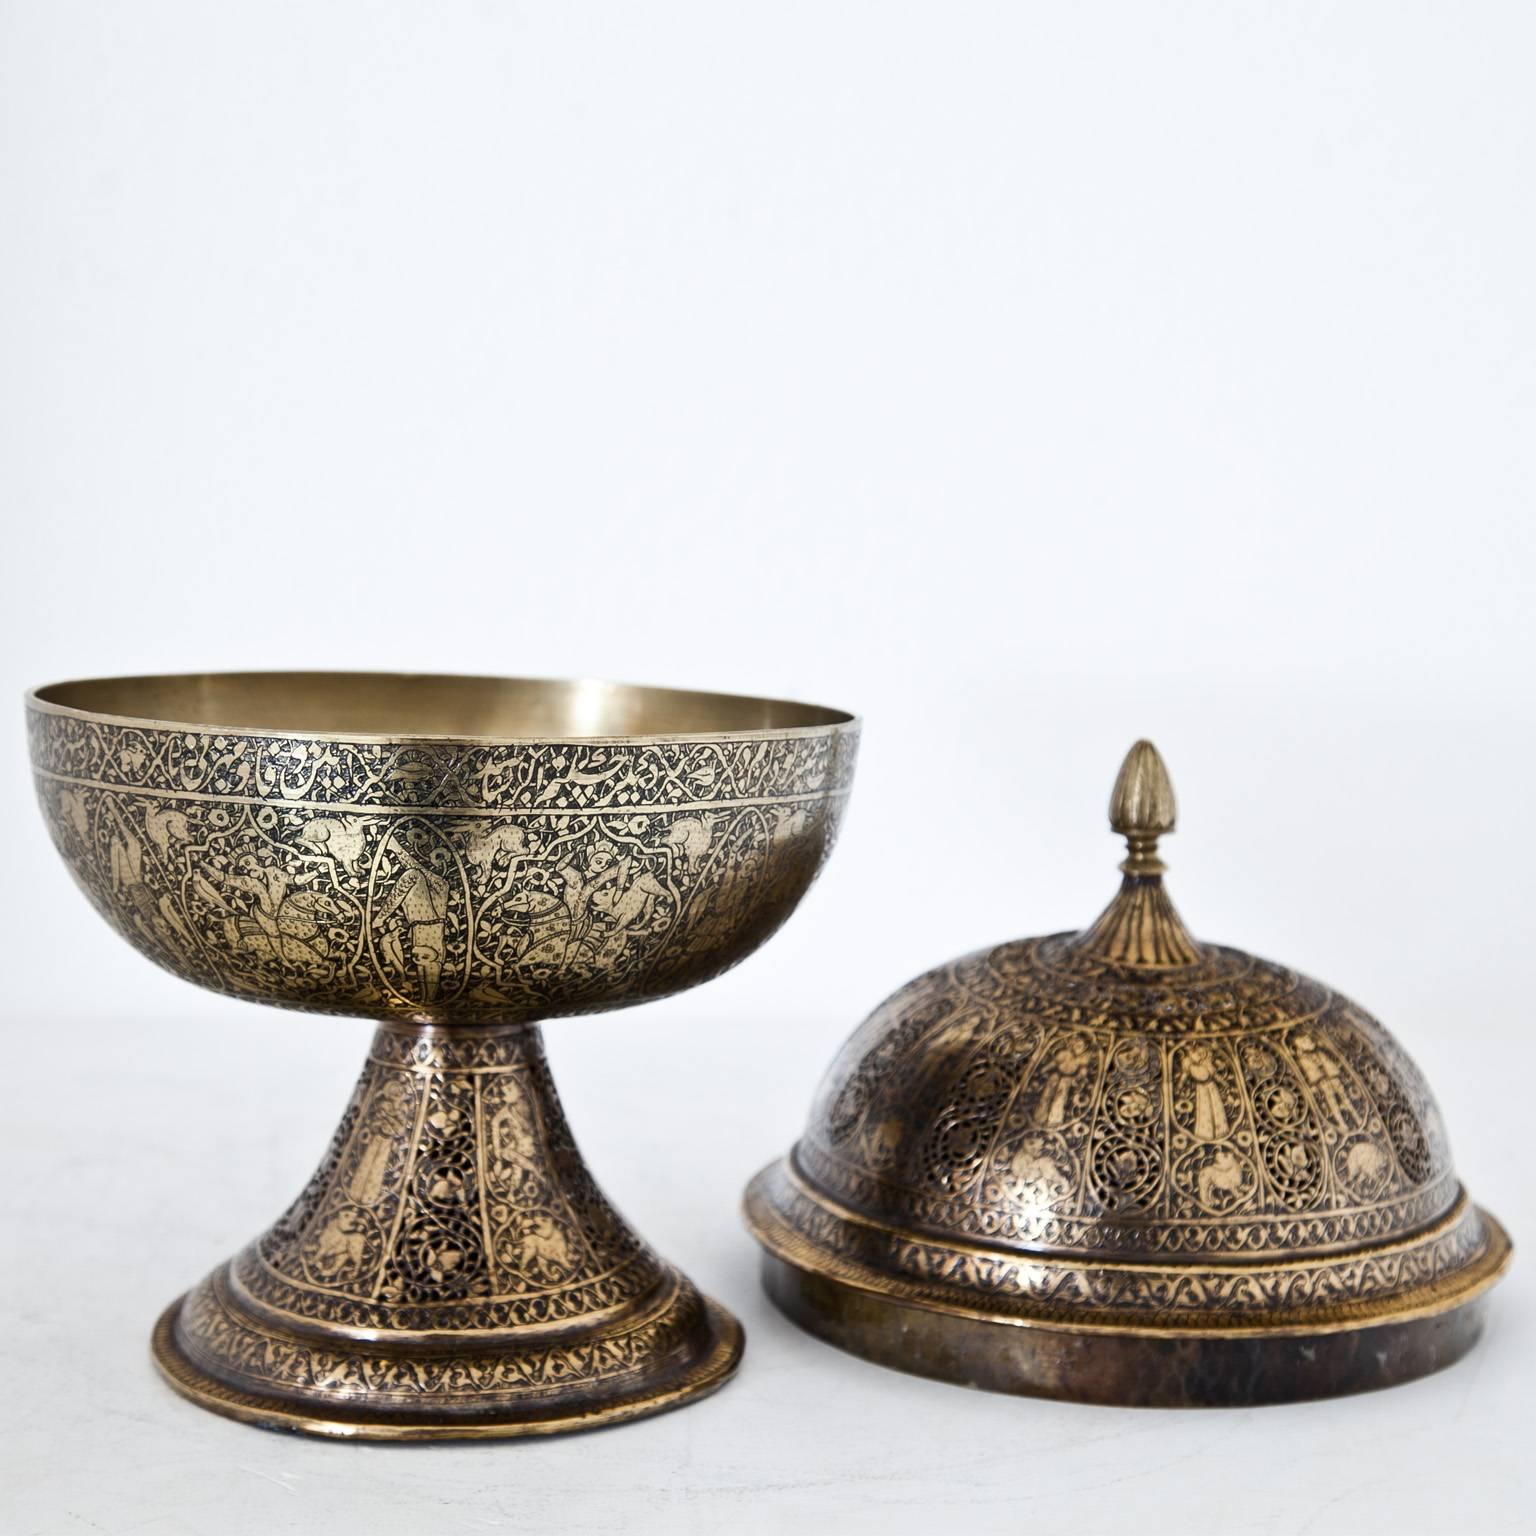 Persian brass censer with round cuppa and a lid with cut-outs. The wall depicts humans and animals in medallions. The cup shows a revolving Arabic inscription.